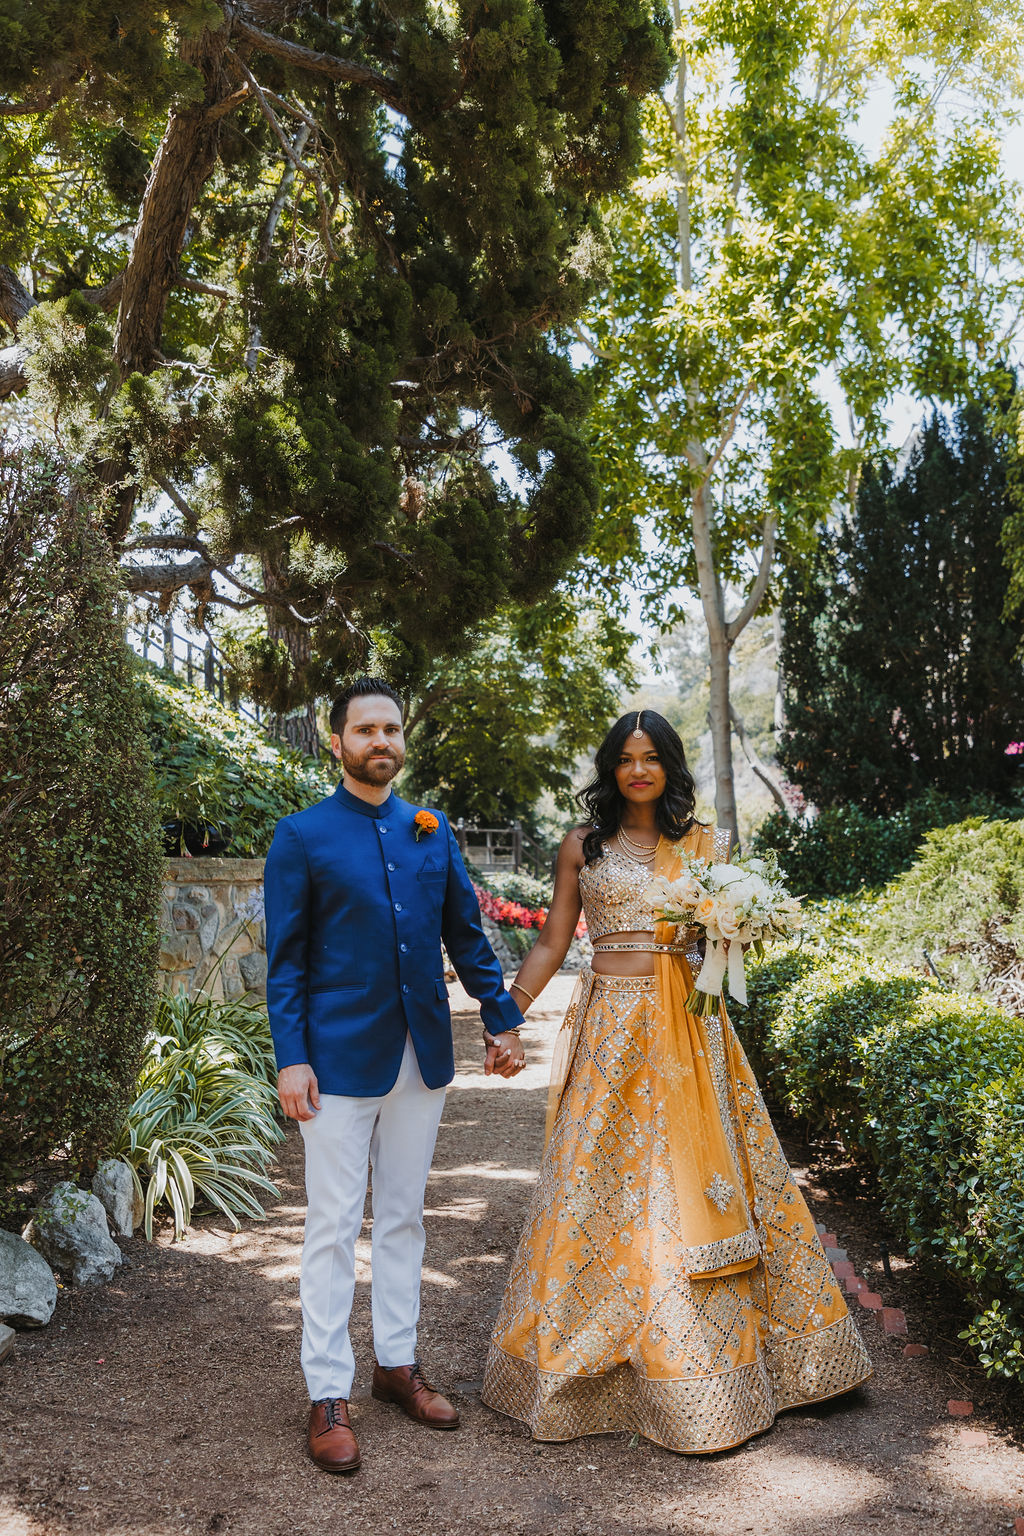 bride in orange marigold colored wedding sari holds bouquet of white and orange flowers during portraits with groom in cobalt blue suit and orange marigold boutonniere at Lake Shrine Temple